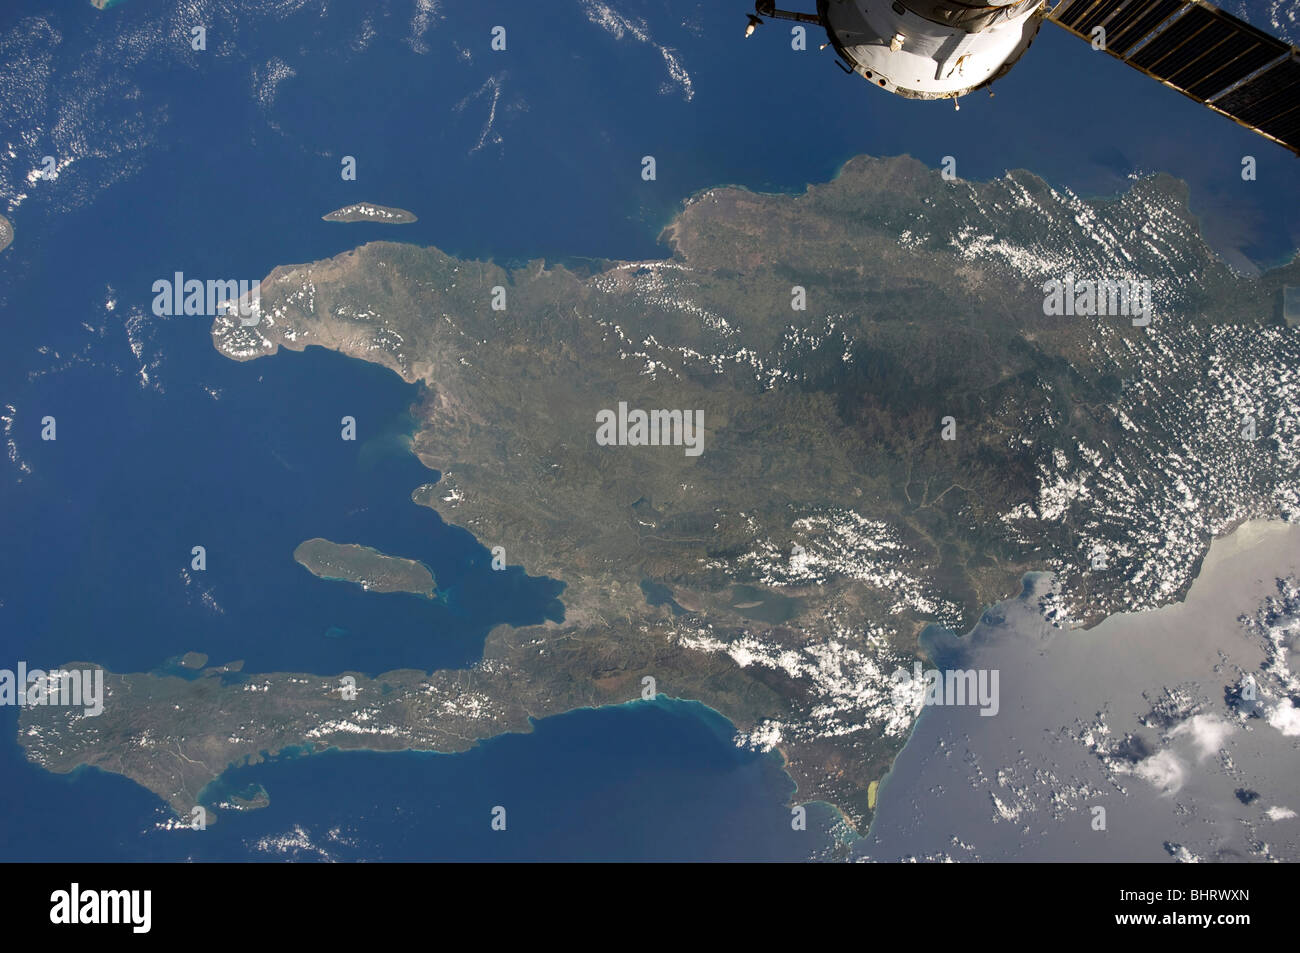 A view of the Caribbean island of Hispaniola from the International Space Station. Stock Photo